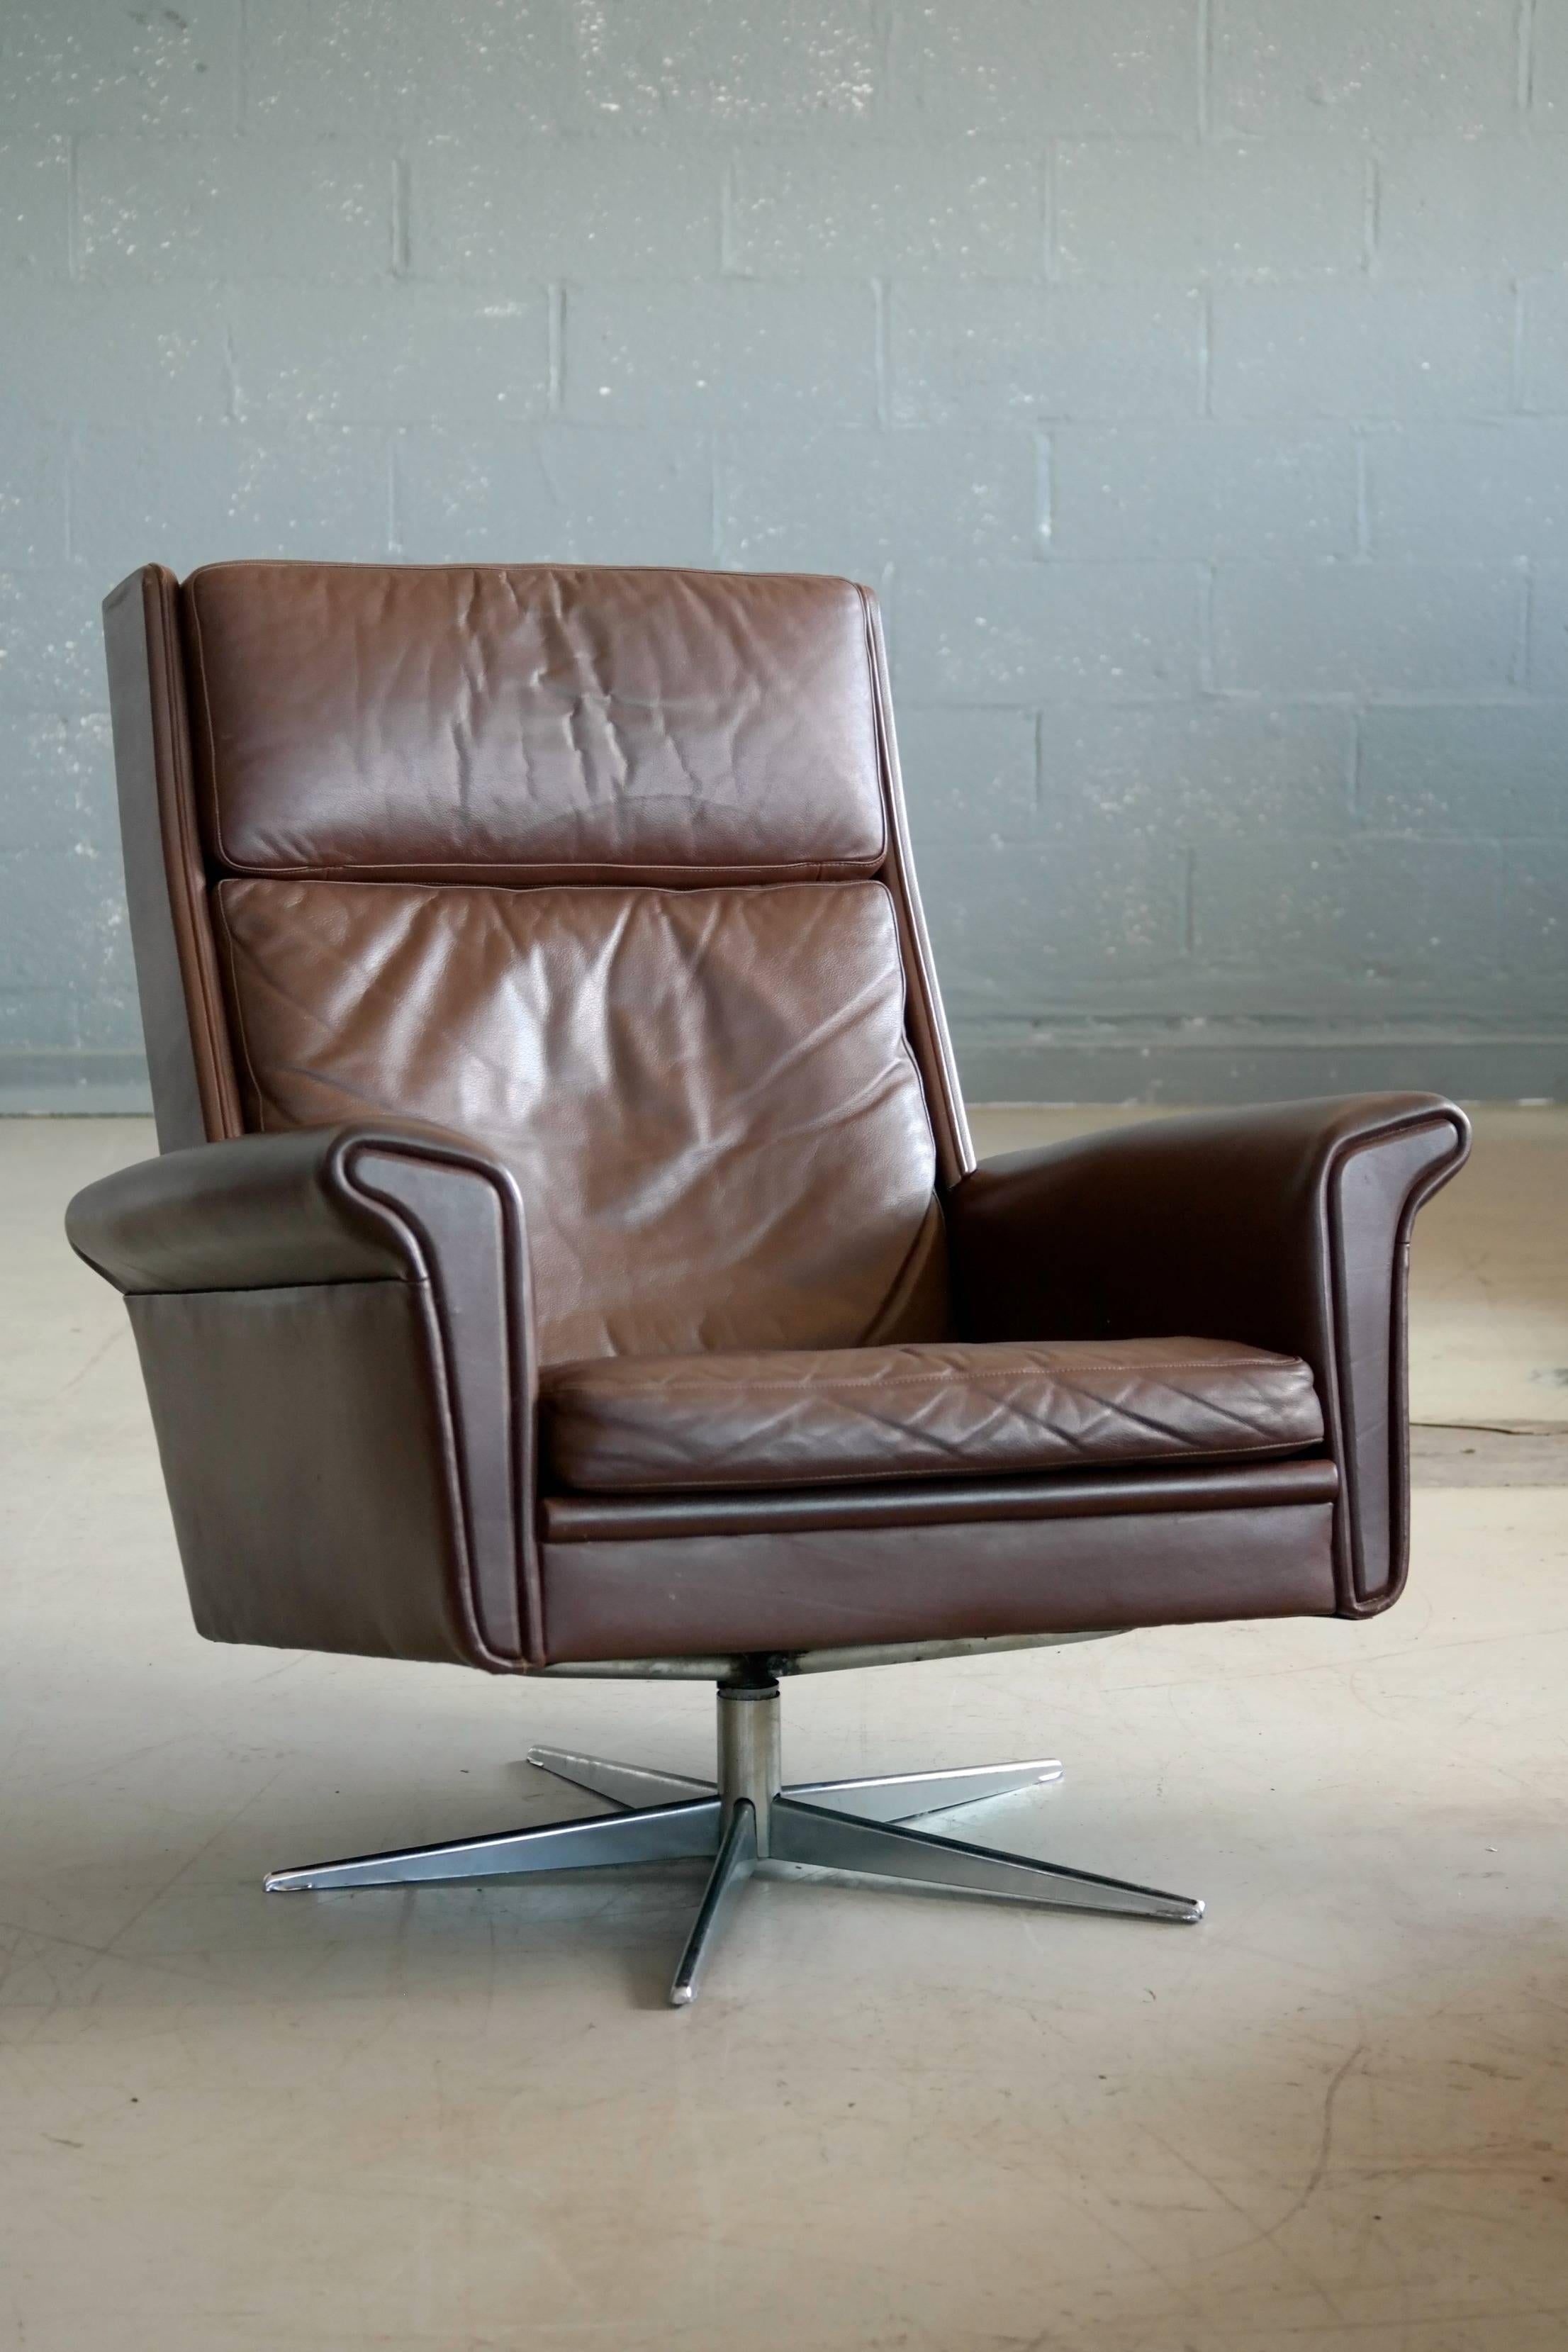 Modern and luxurious swivel chair in supple brown chocolate colored leather on a chrome-plated aluminum swivel base. Beautiful example of Danish Modern at its best designed by Georg Thams, circa 1969 and produced sometimes in the early 1970s. The